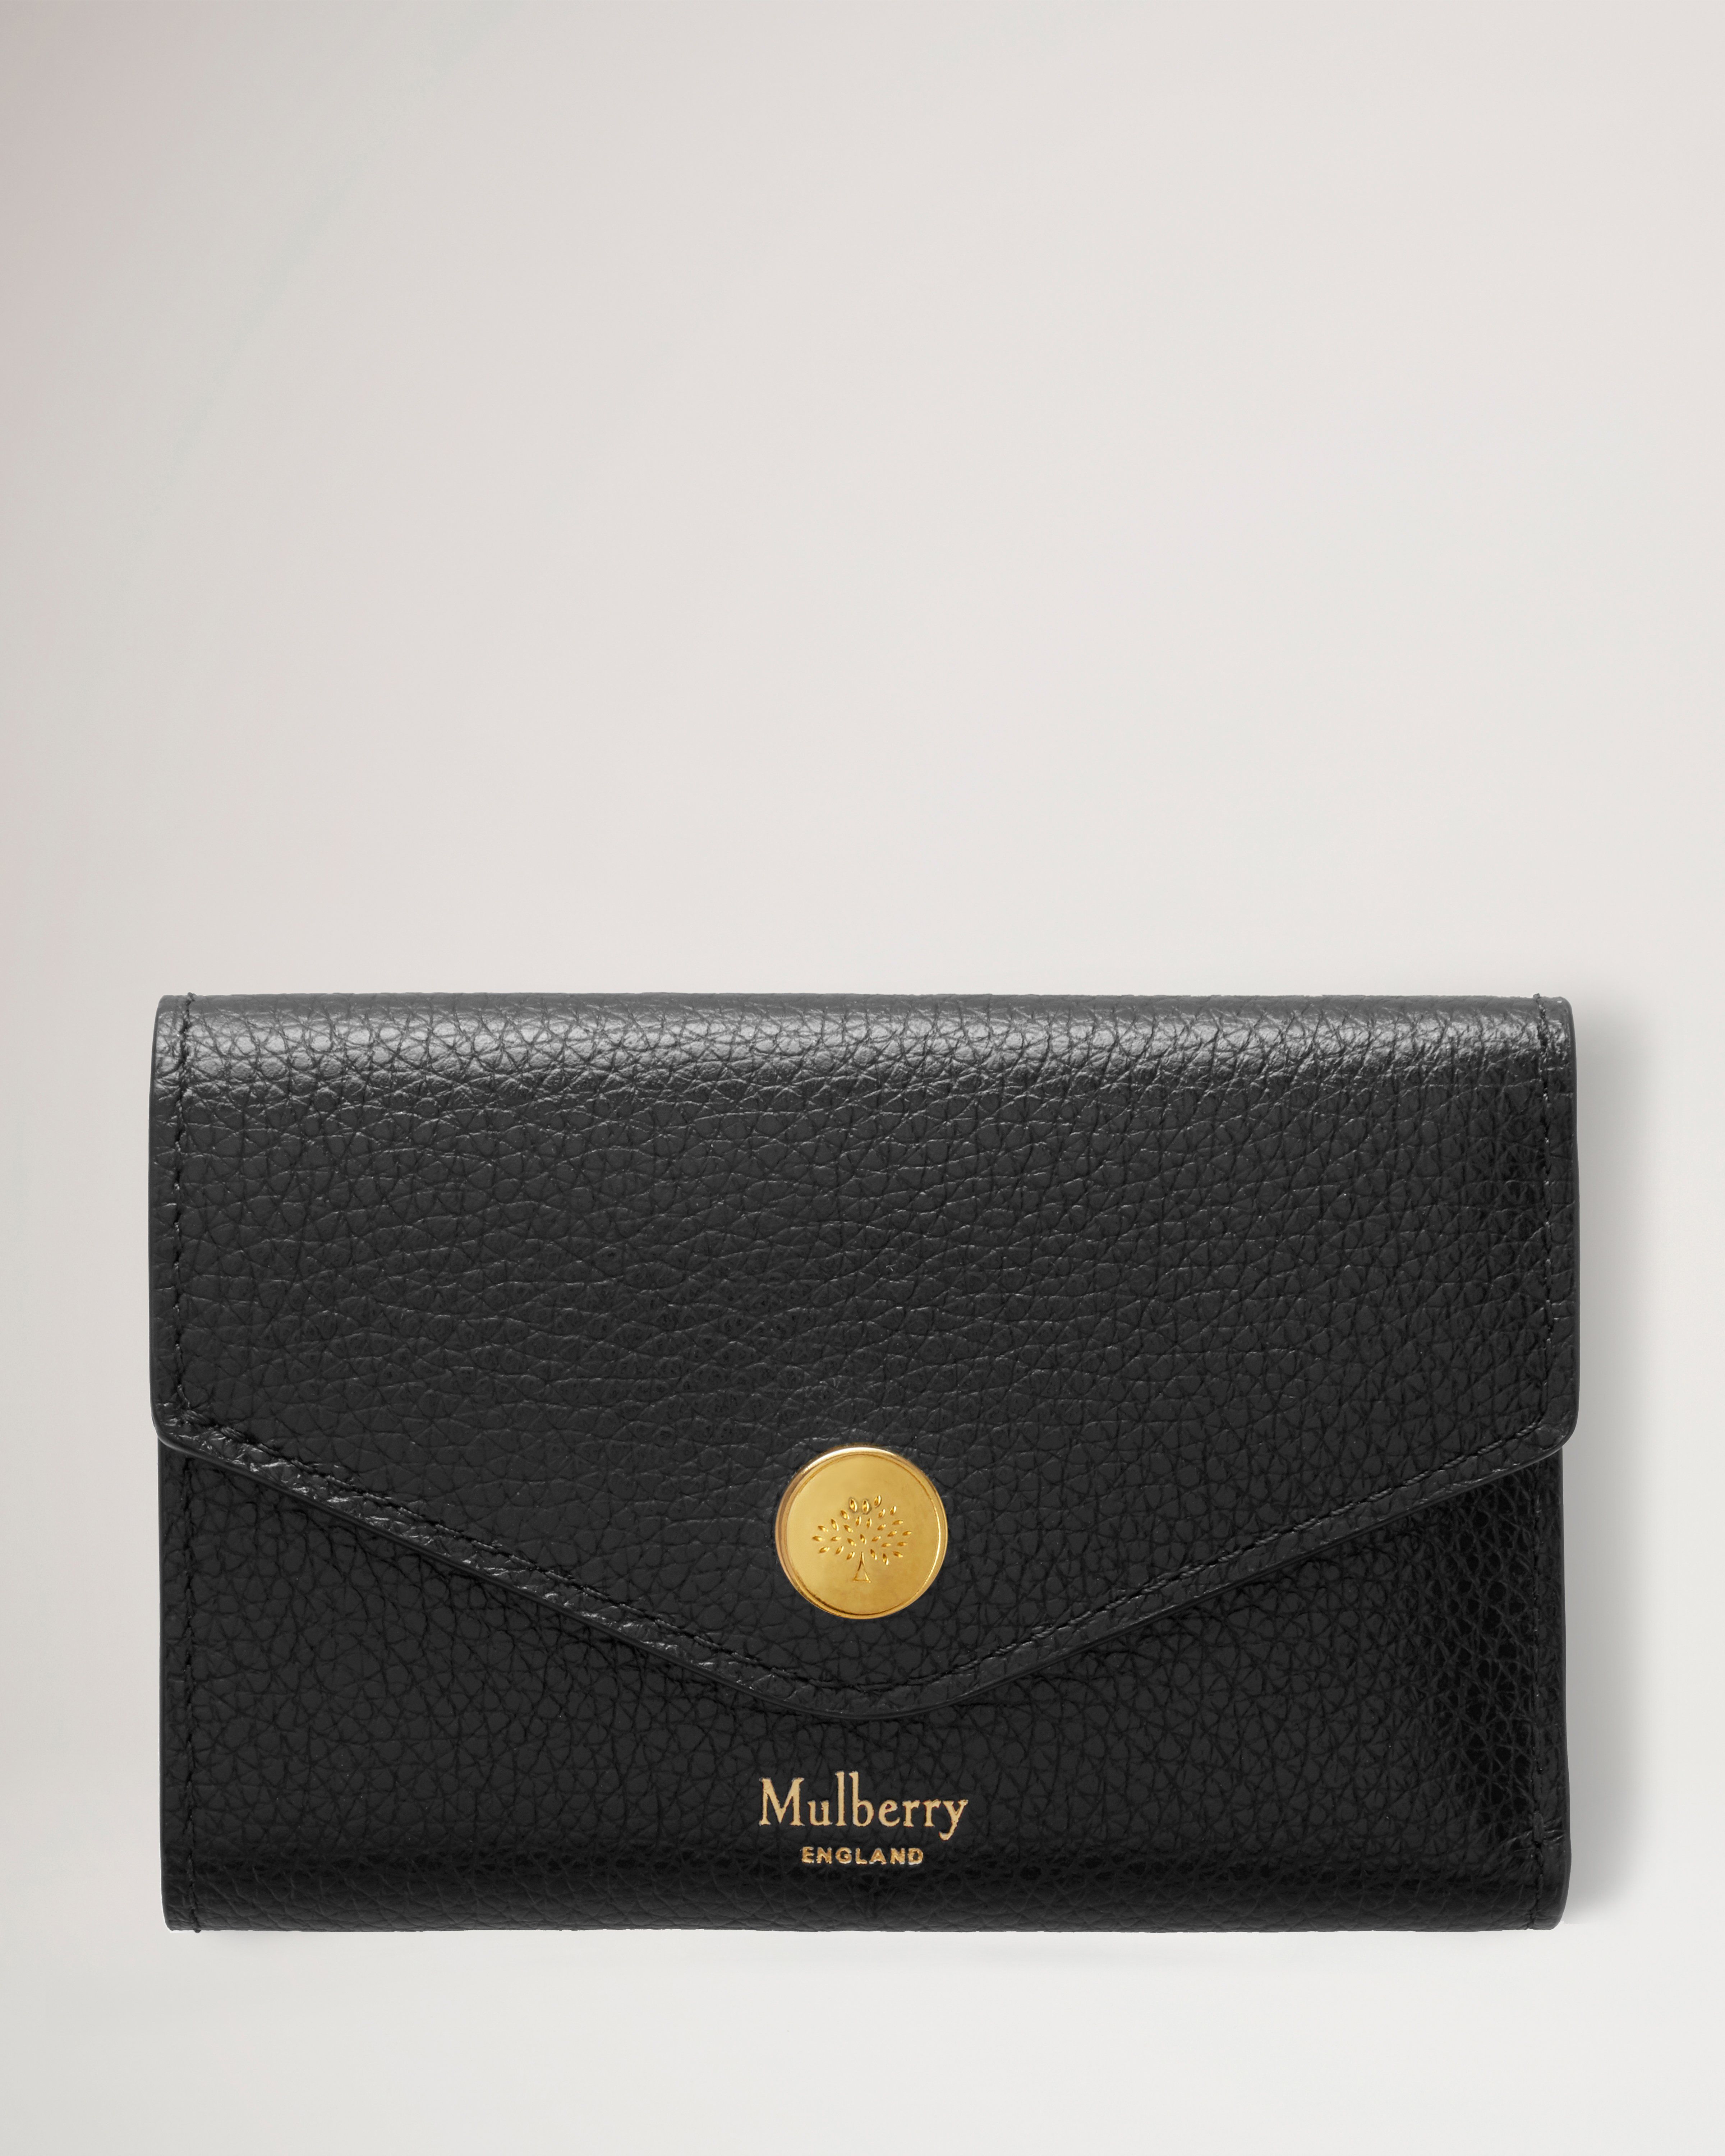 Buy Gucci Card Wallet Online In India -  India